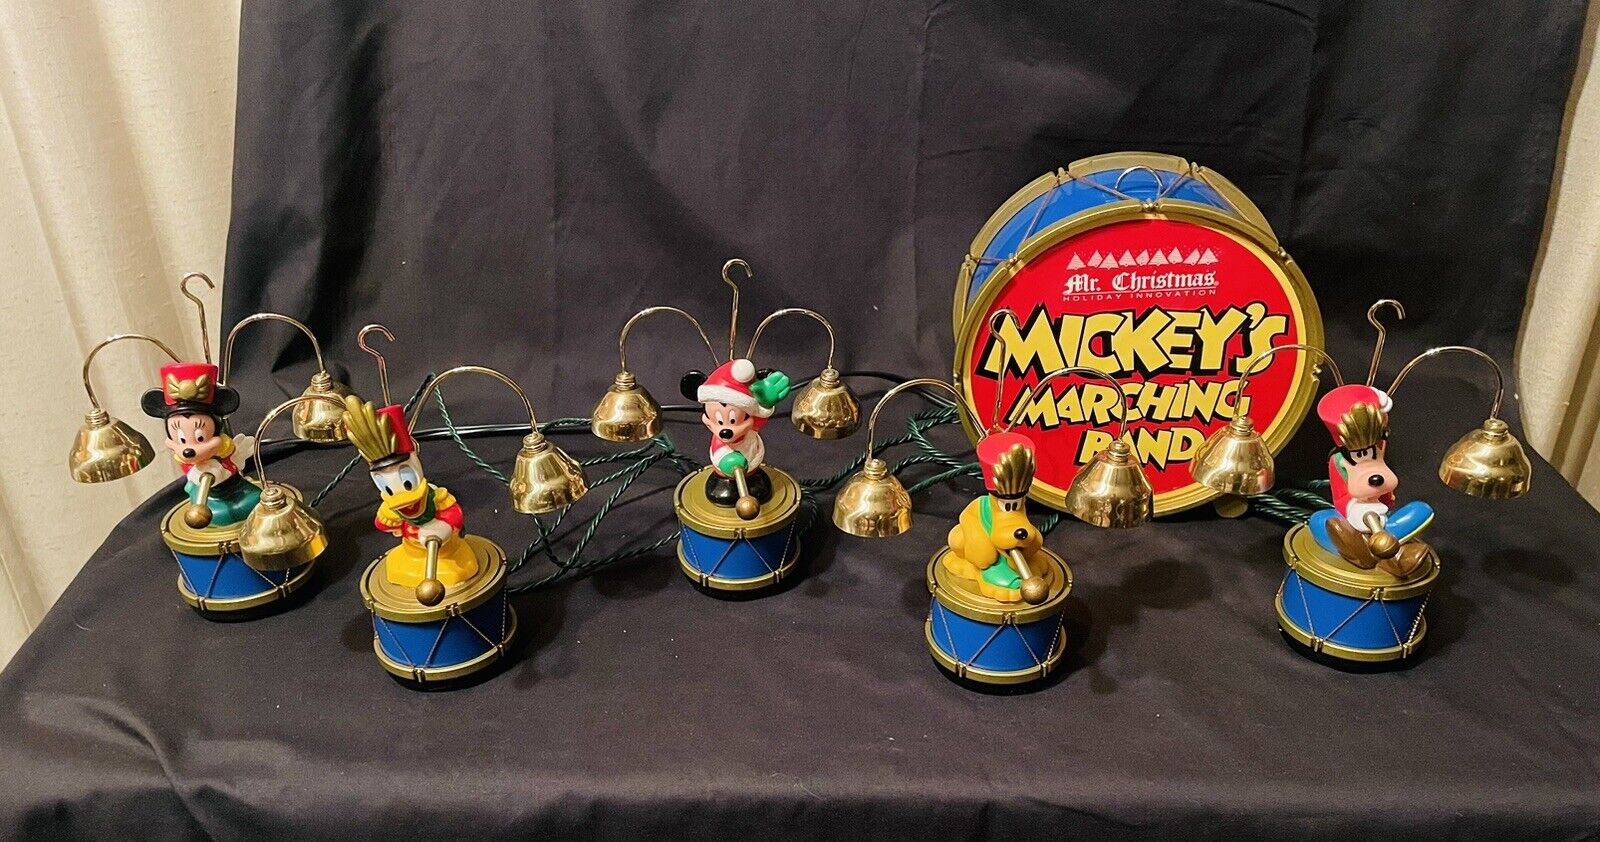 1993 Mr. Christmas Mickey\'s Marching Band String Decor Awesome WATCH VIDEO